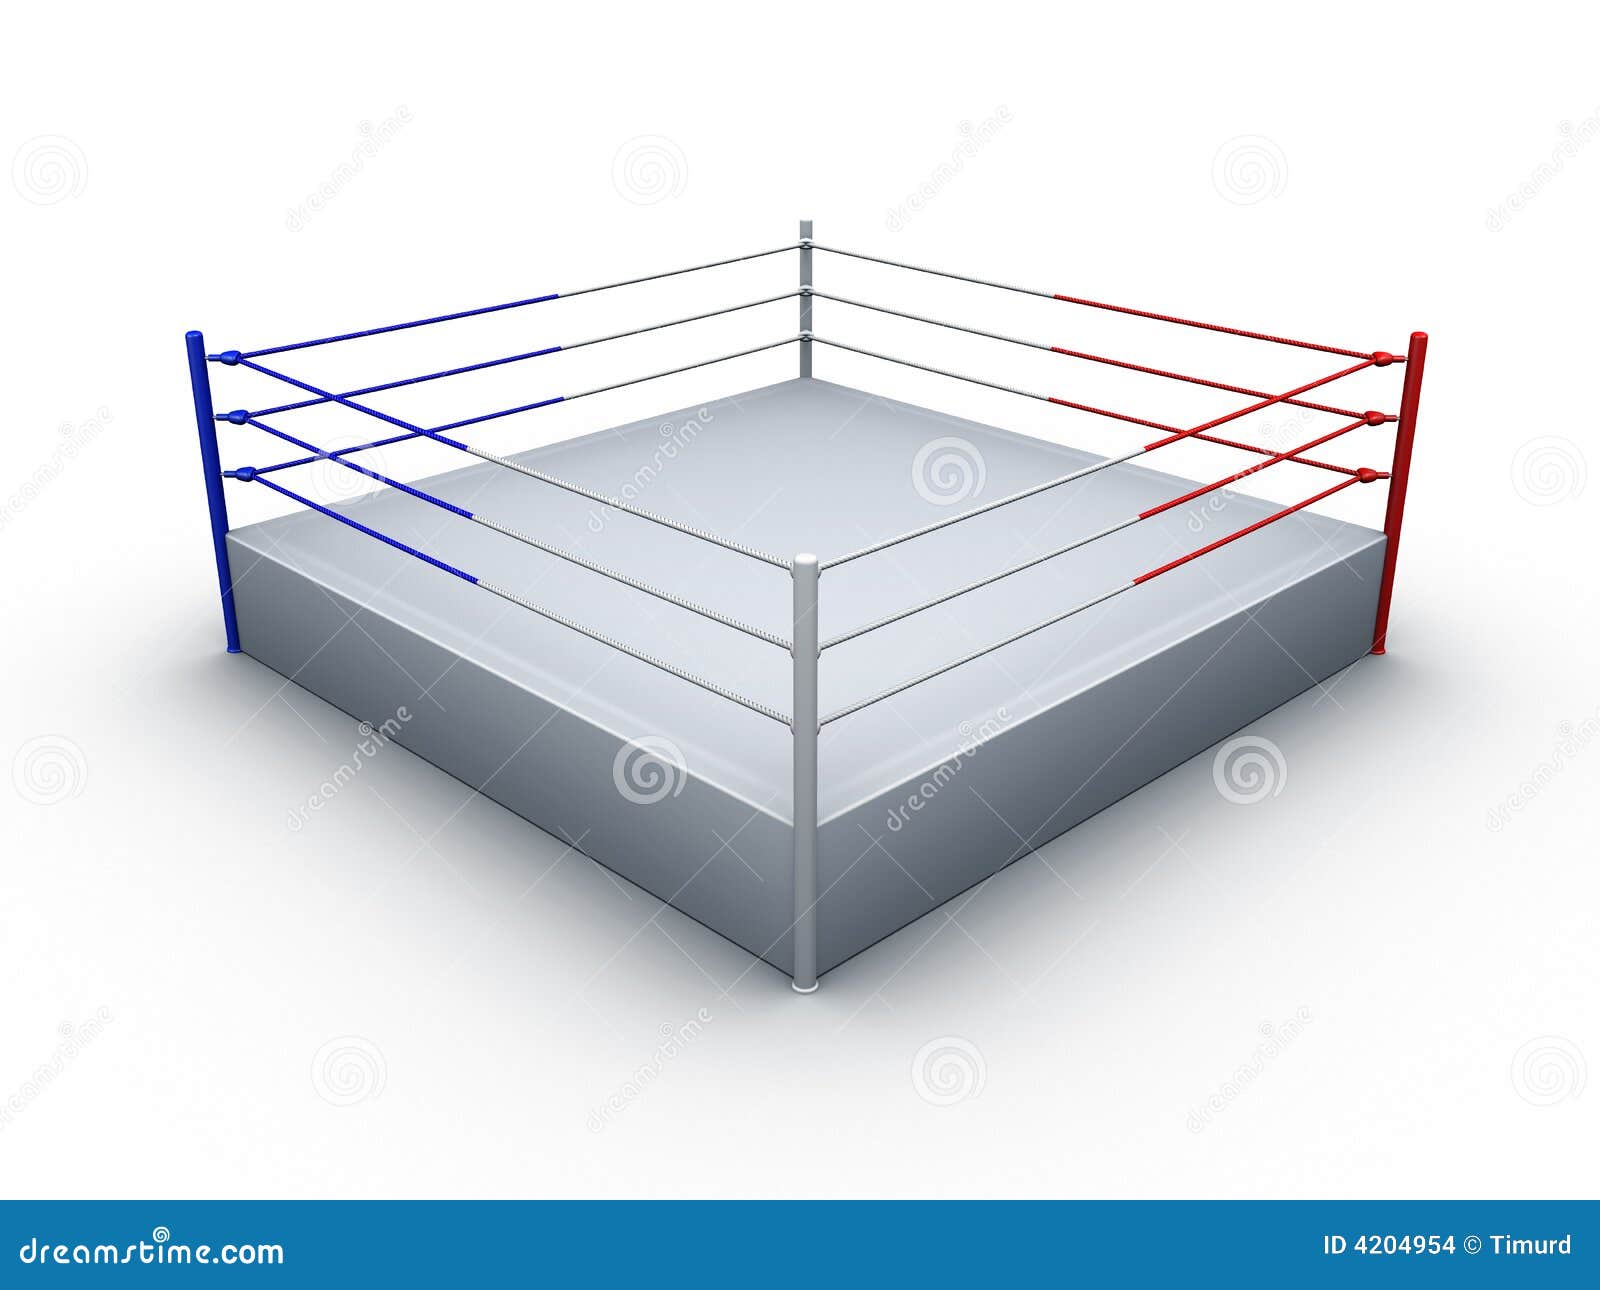 clipart boxing ring - photo #29